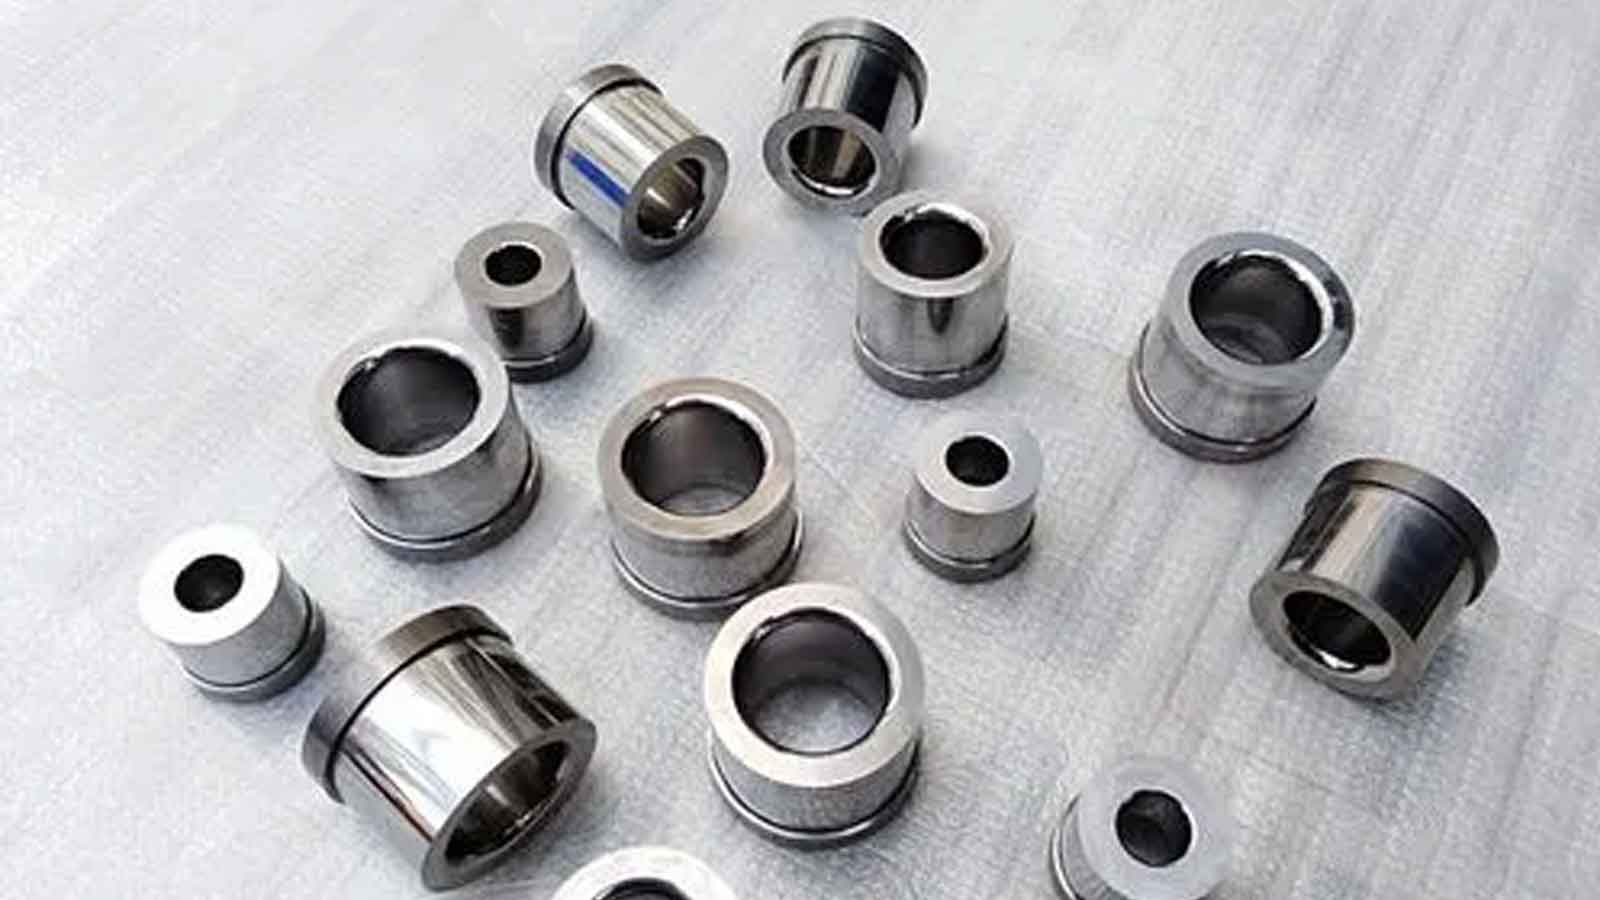 As a raw material for pneumatic probe, what are the advantages and characteristics of tungsten steel?